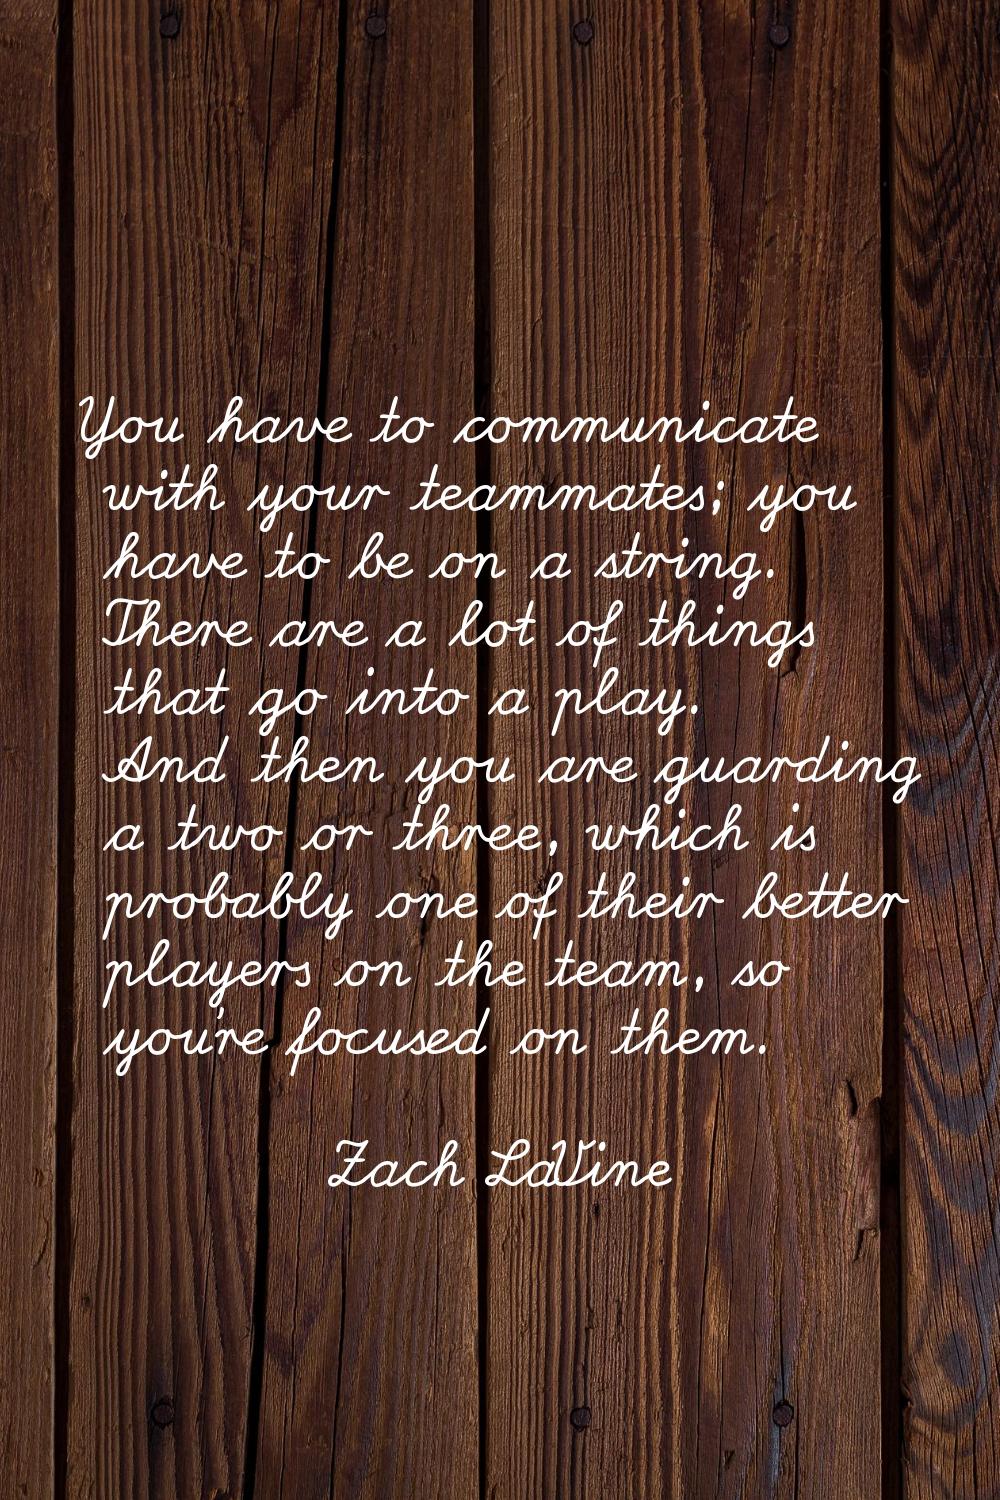 You have to communicate with your teammates; you have to be on a string. There are a lot of things 